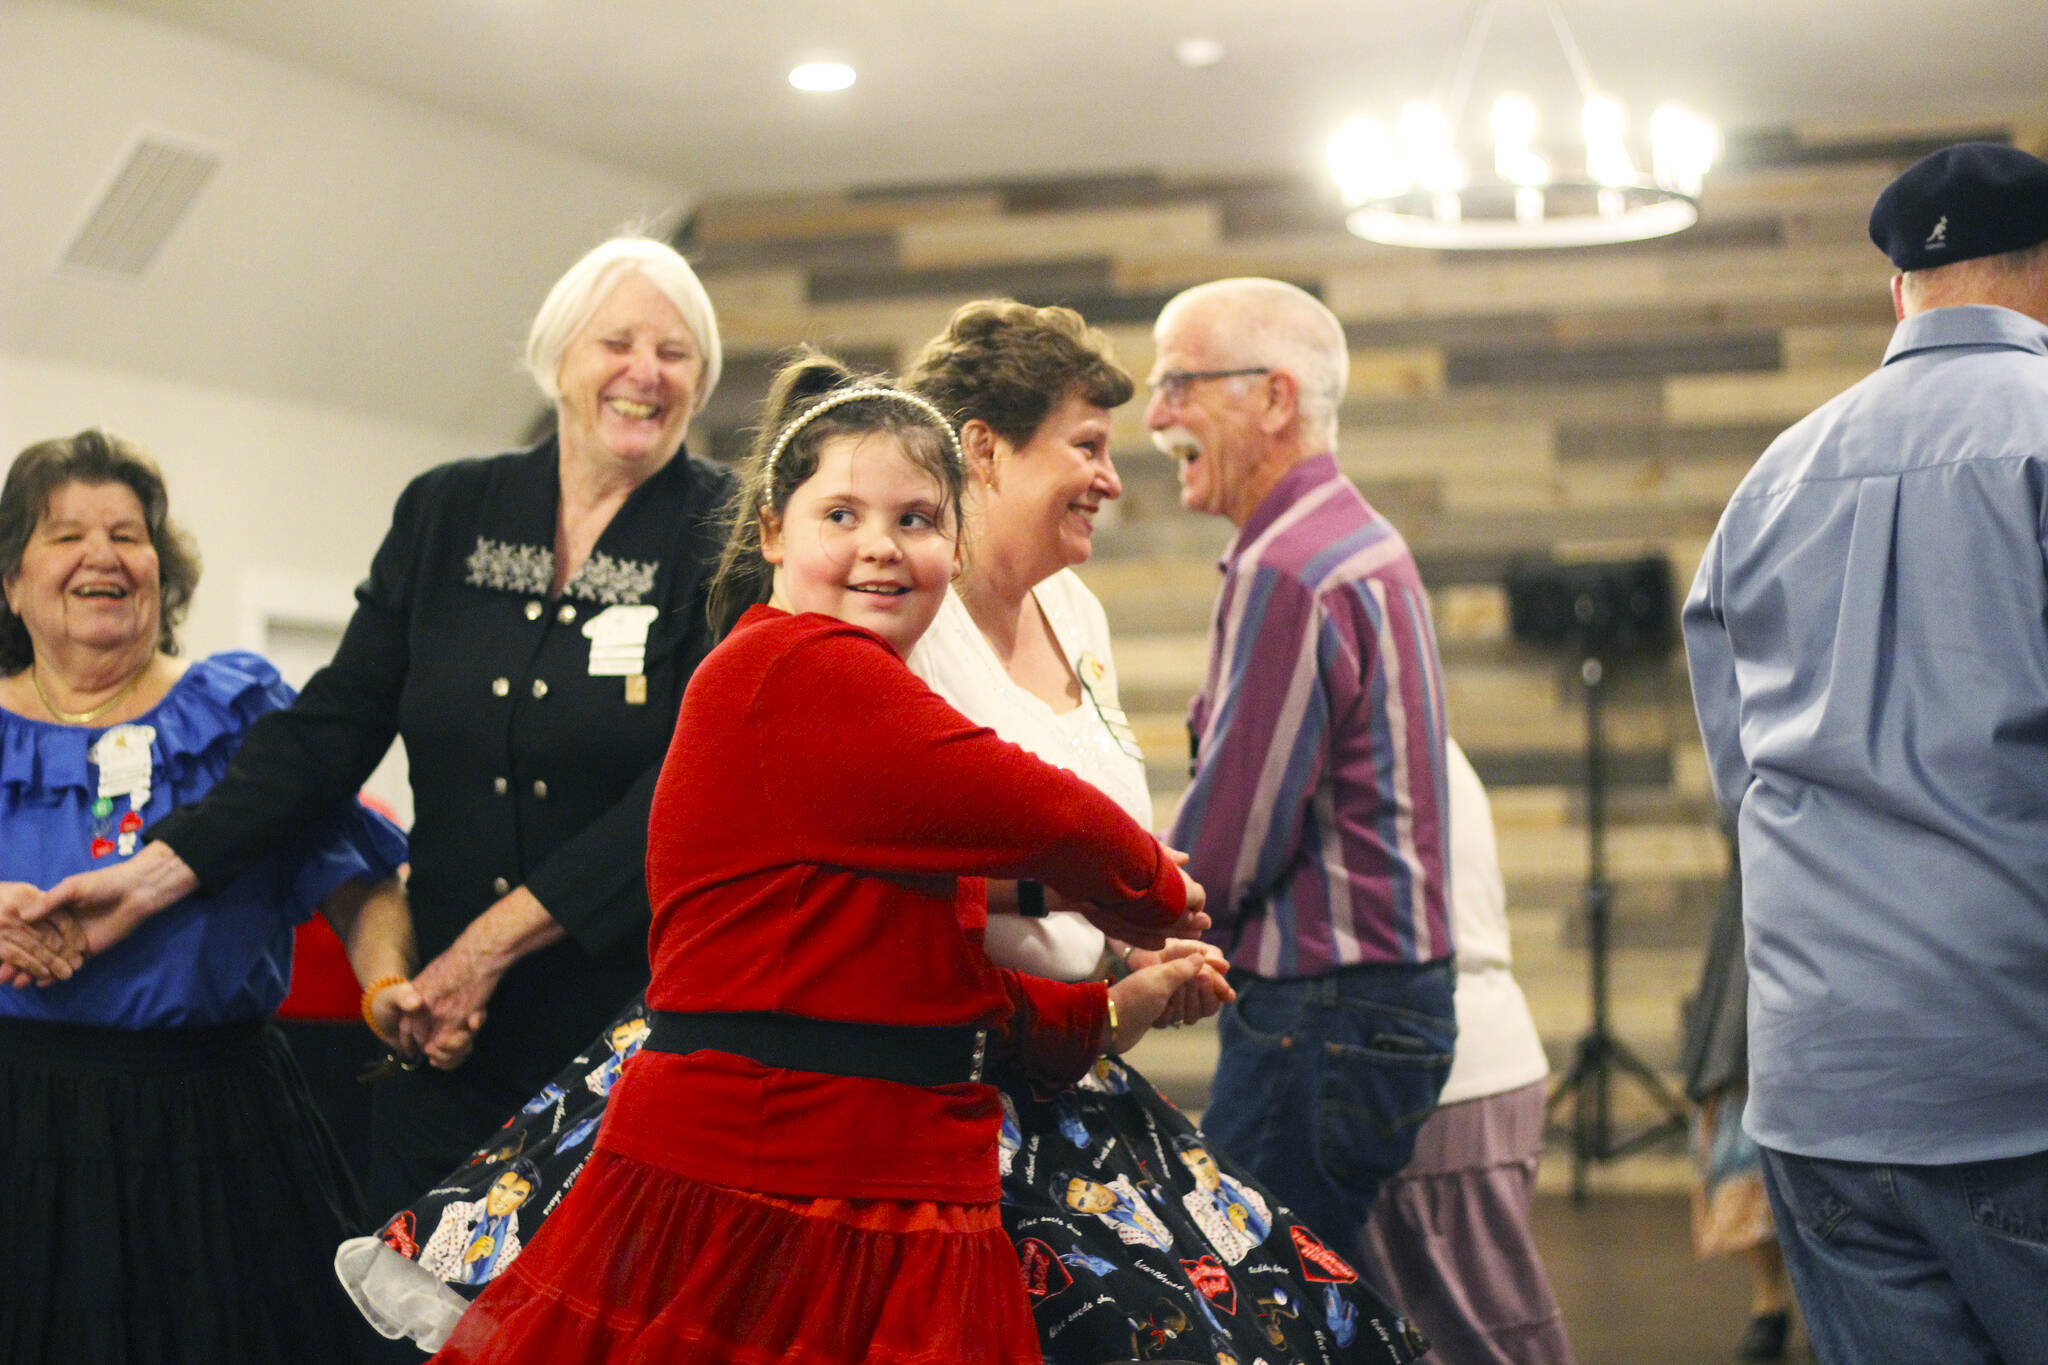 Photo by Ray Miller-Still
The Buckley Spinners meet for square dancing lessons on Tuesdays from 7 to 9 p.m. at Buckley Hall, and a new 14-week course begins on Feb. 6. For more information, head to facebook.com/groups/spinnerssquaredanceclub. Pictured in red is Taylor Wild, dancing at an open dance last year.